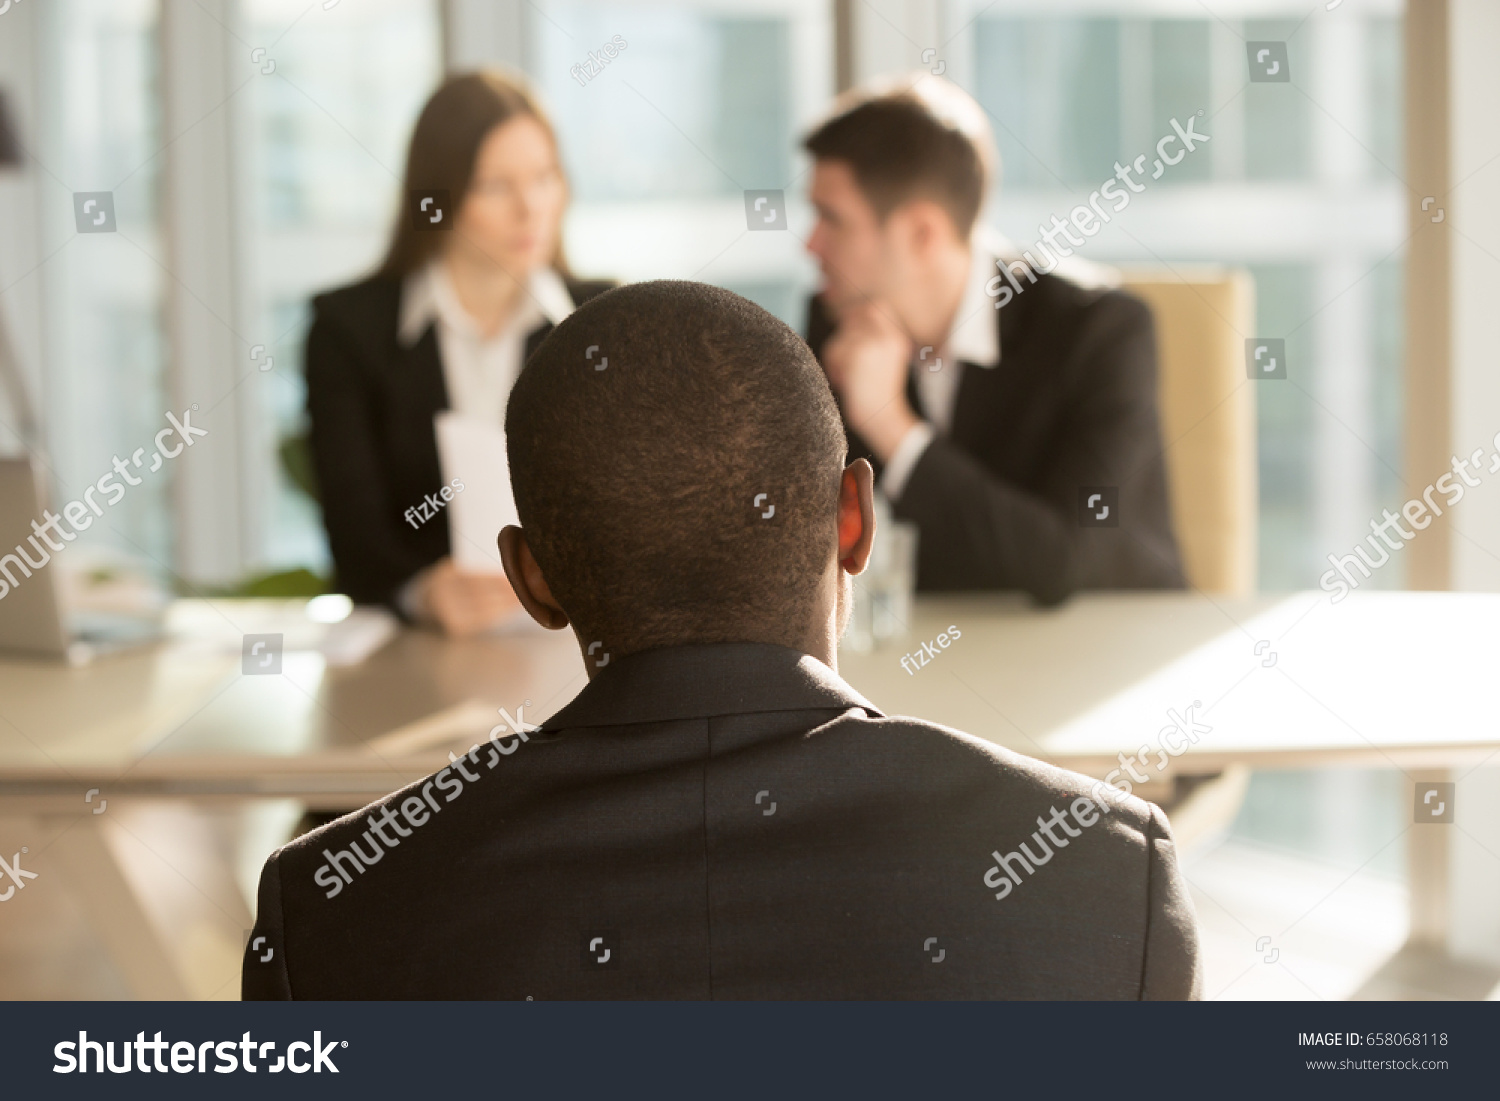 Nervous african-american applicant waiting for result after job interview, hr managers making decision at background, black businessman patiently awaits for claim complaint consideration, back view #658068118